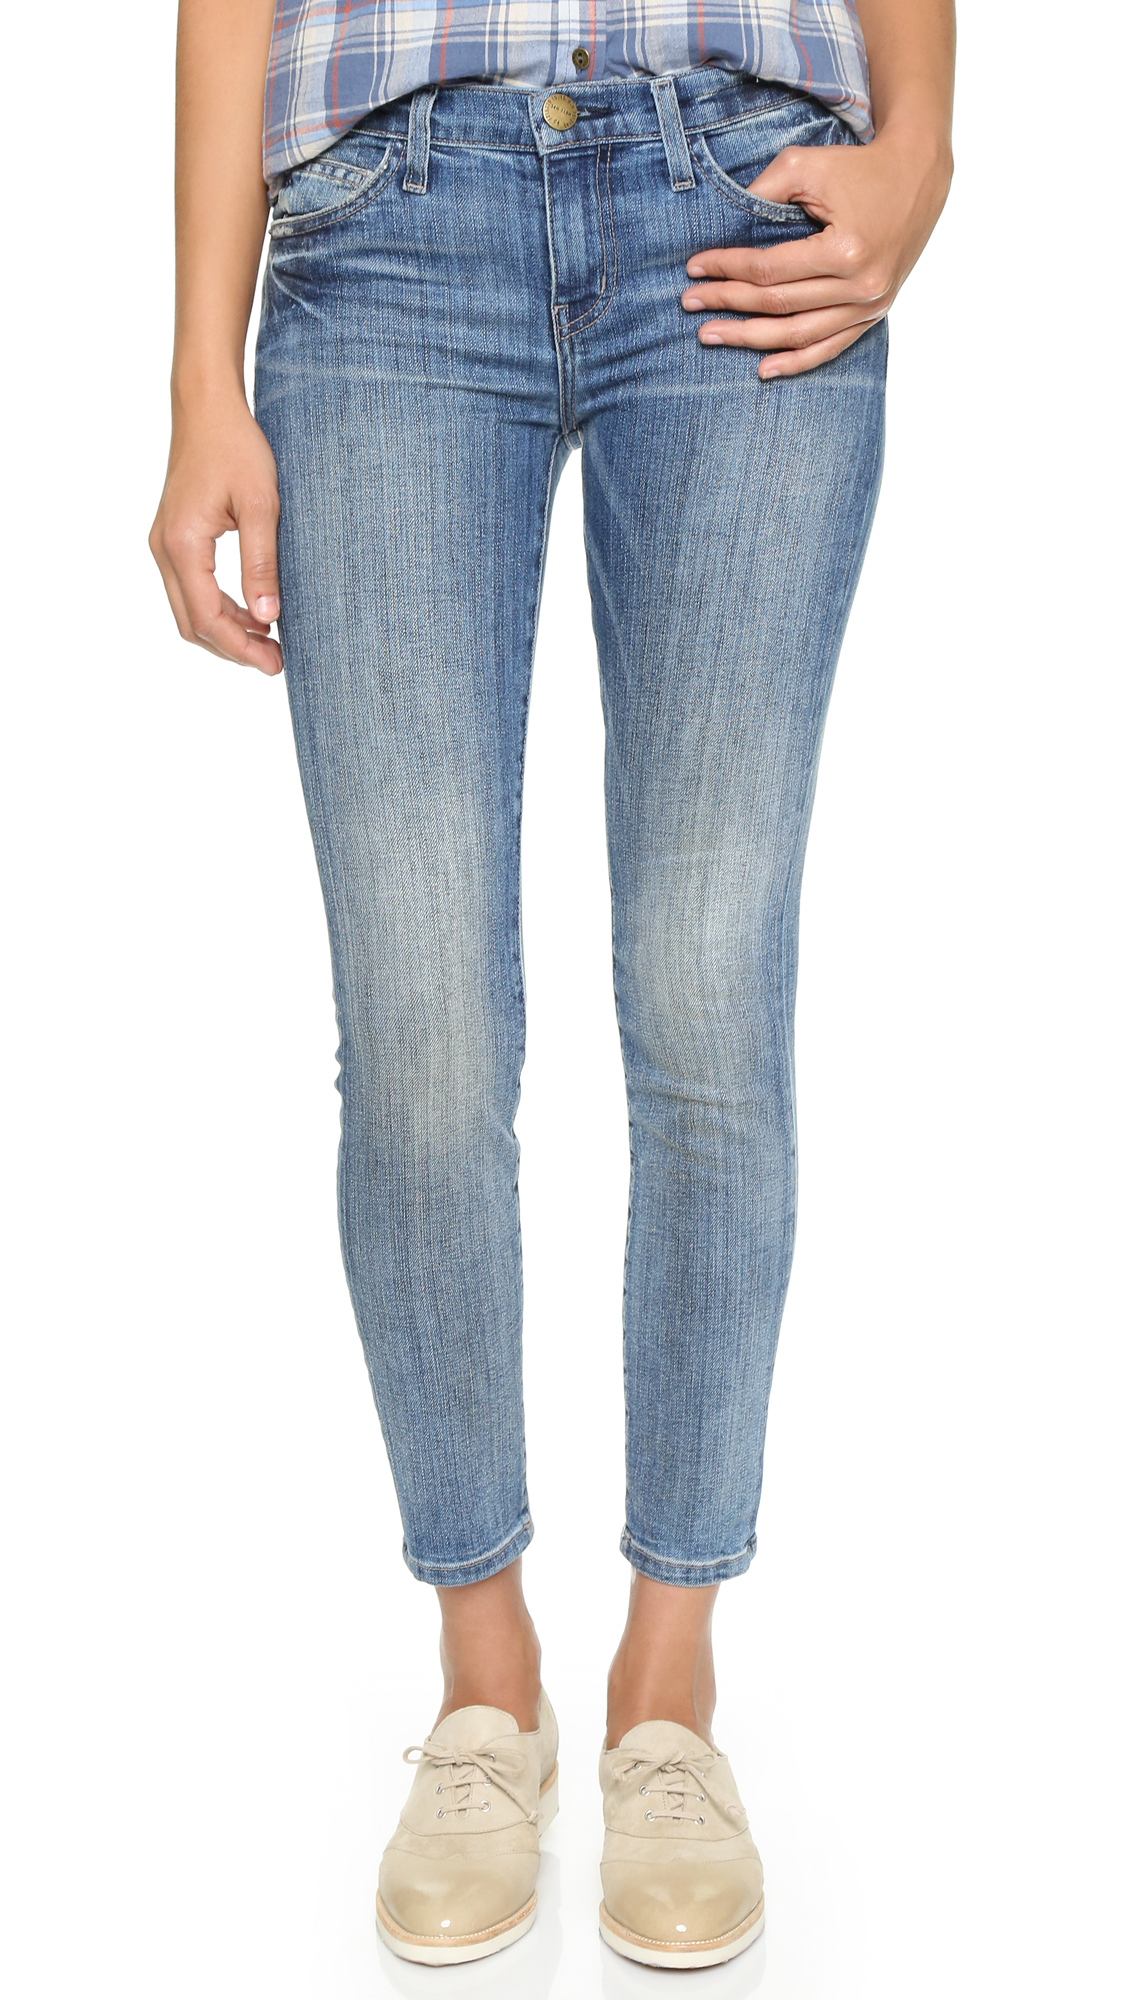 Lyst - Current/Elliott The Stiletto Jeans in Blue